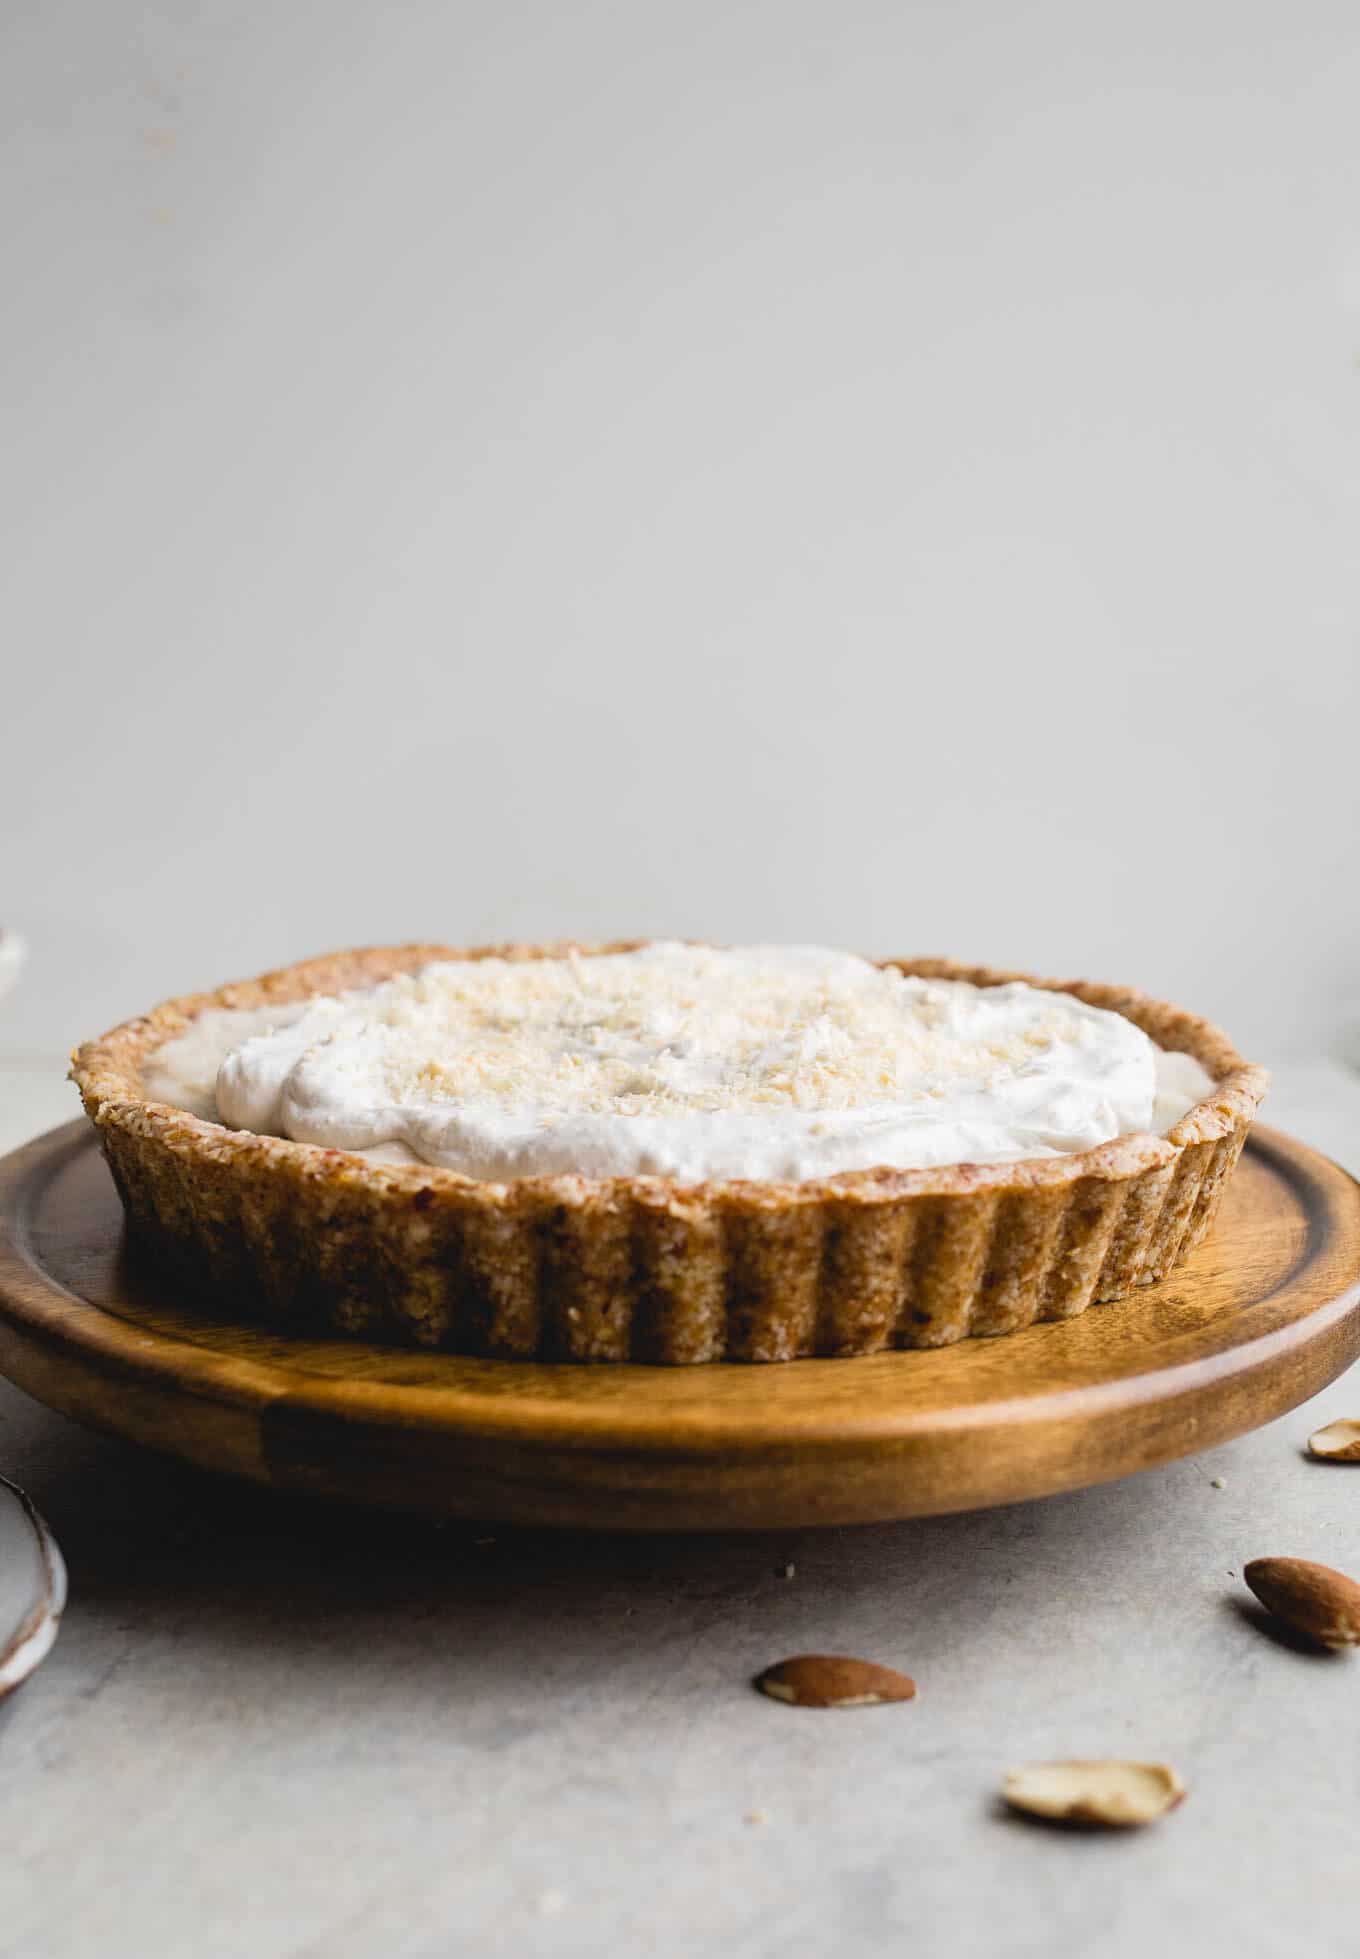 This No-Bake Coconut Cream Pie is made with a sprouted almond press-in crust, coconut milk pudding filling, and topped coconut cream and toasted shredded coconut. Gluten-free, vegan.